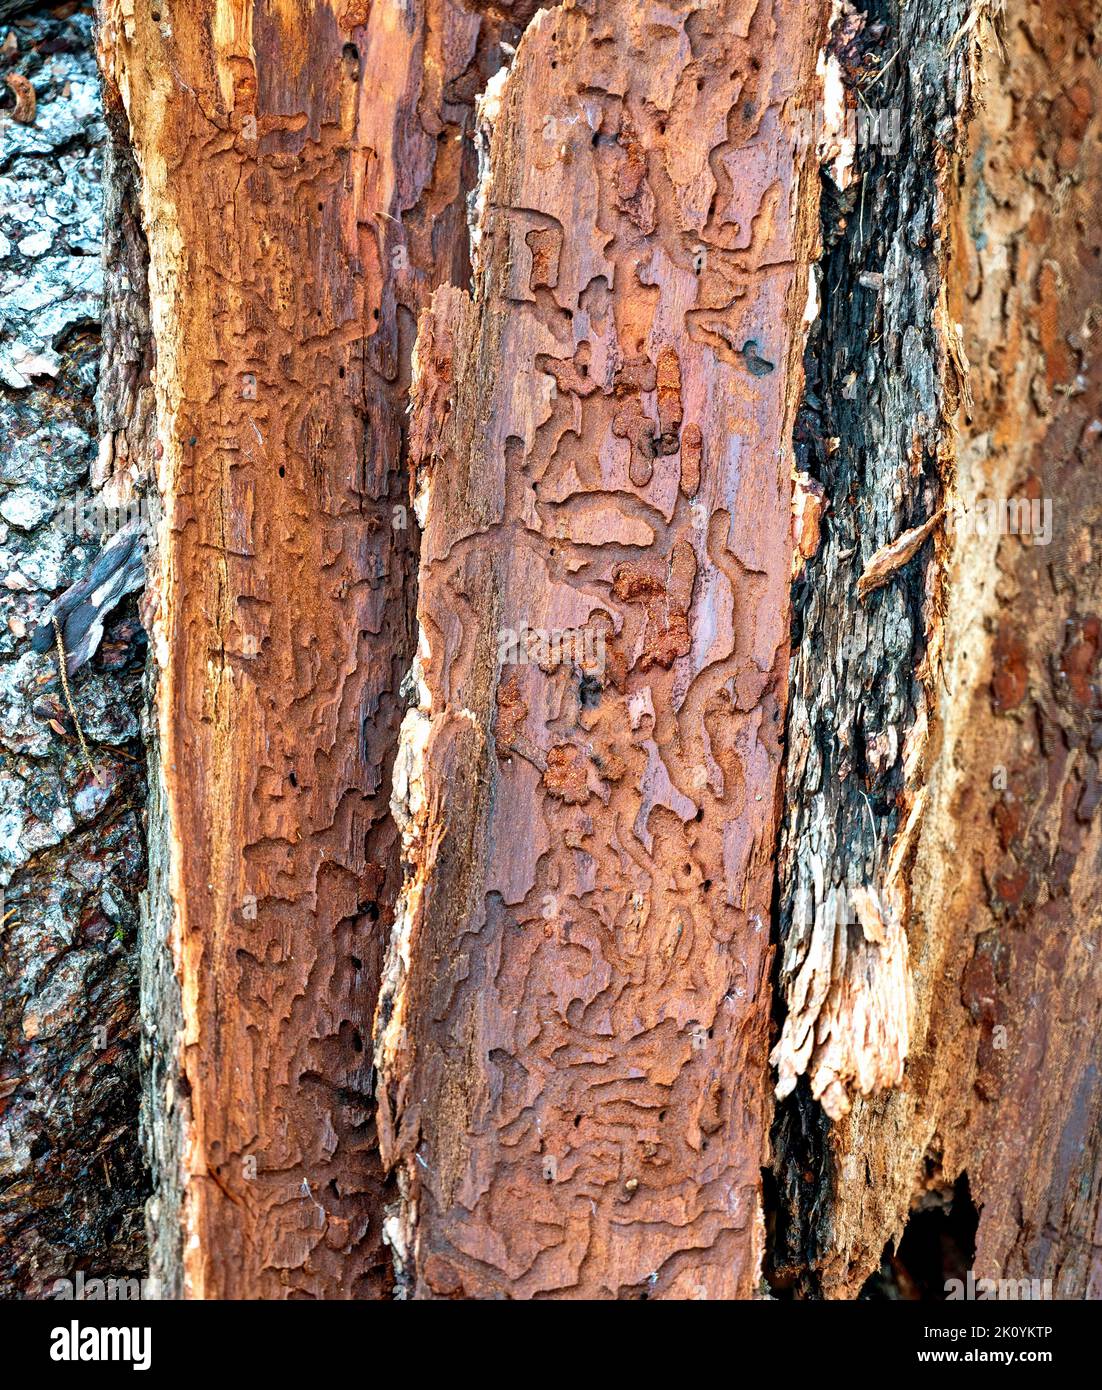 Pieces of bark with bark beetle galleries under the bark of a conifer tree, Austria Stock Photo